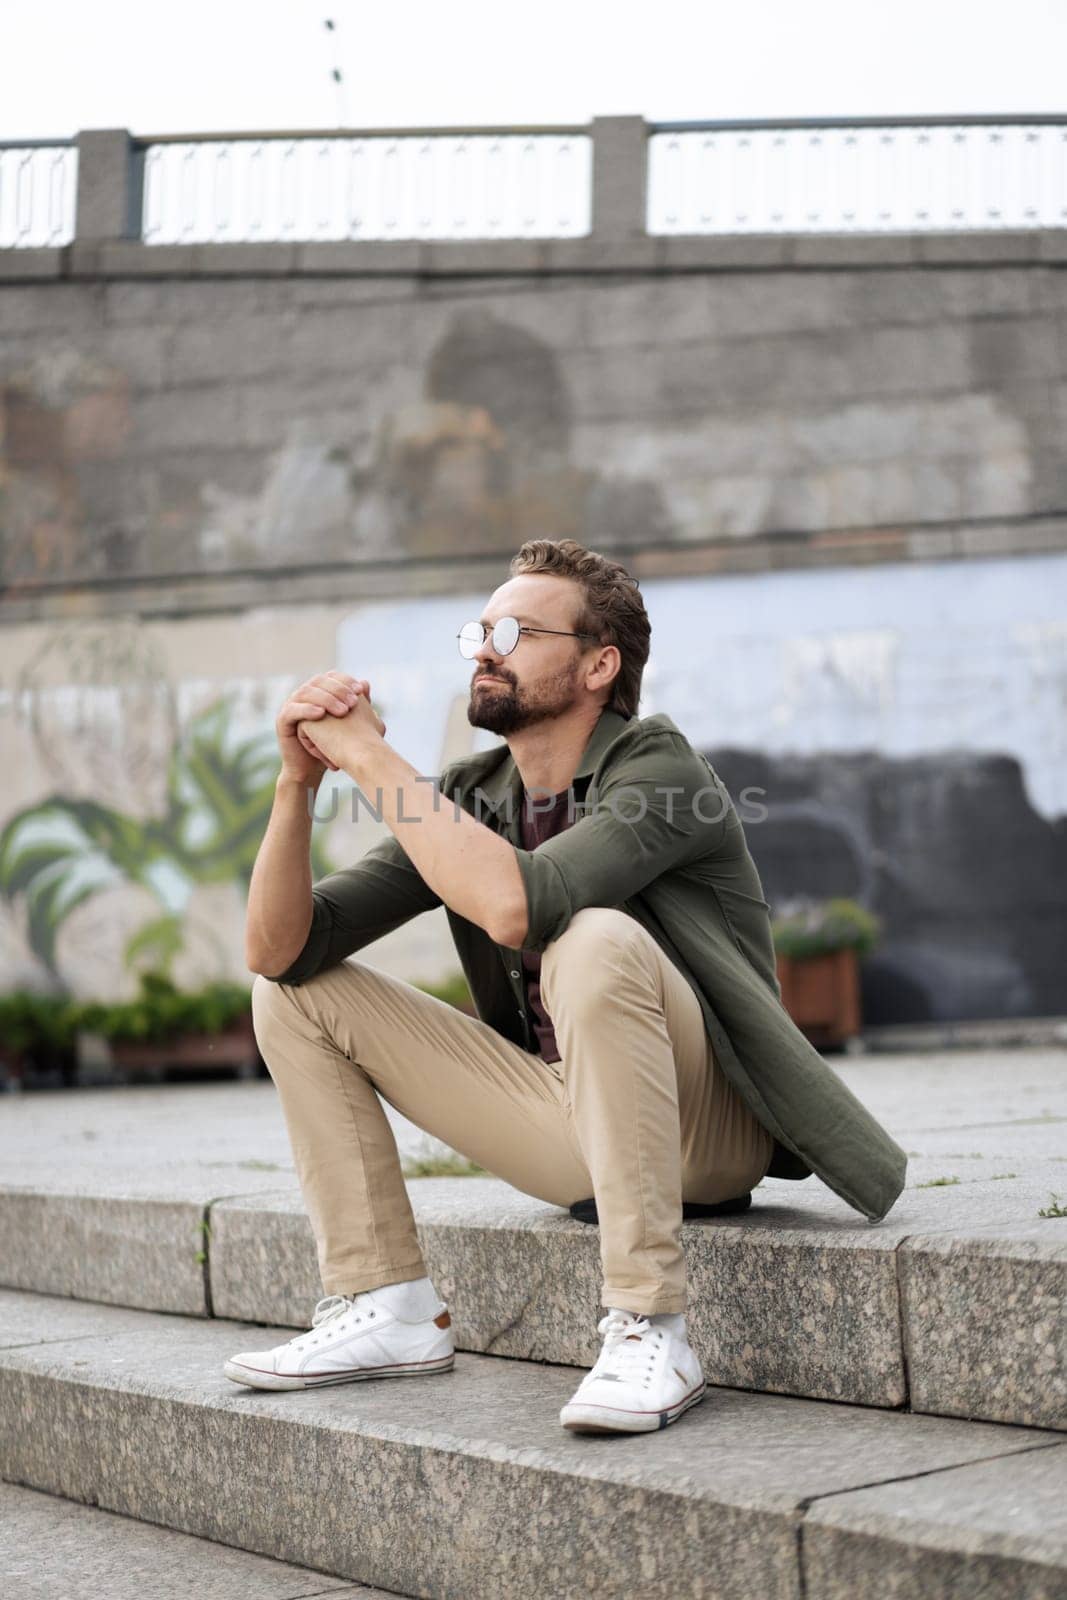 Dreamer, man seated on outdoor stairs, lost in thoughts and dreaming about plans for future. With serene and peaceful expression, he contemplates aspirations and envisions goals. by LipikStockMedia